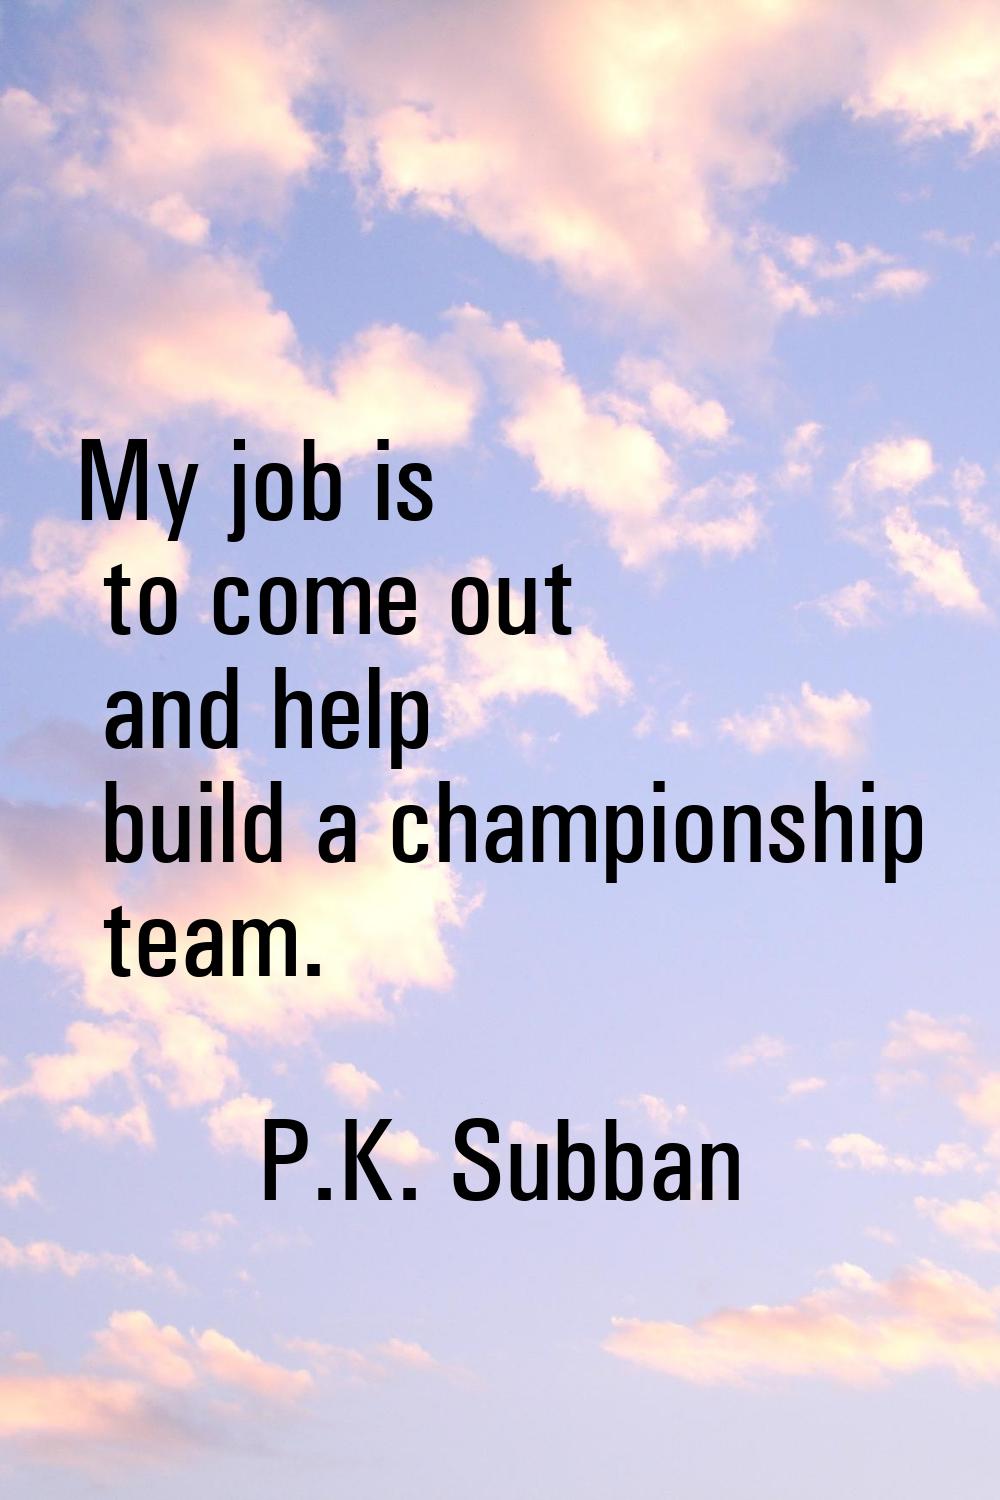 My job is to come out and help build a championship team.